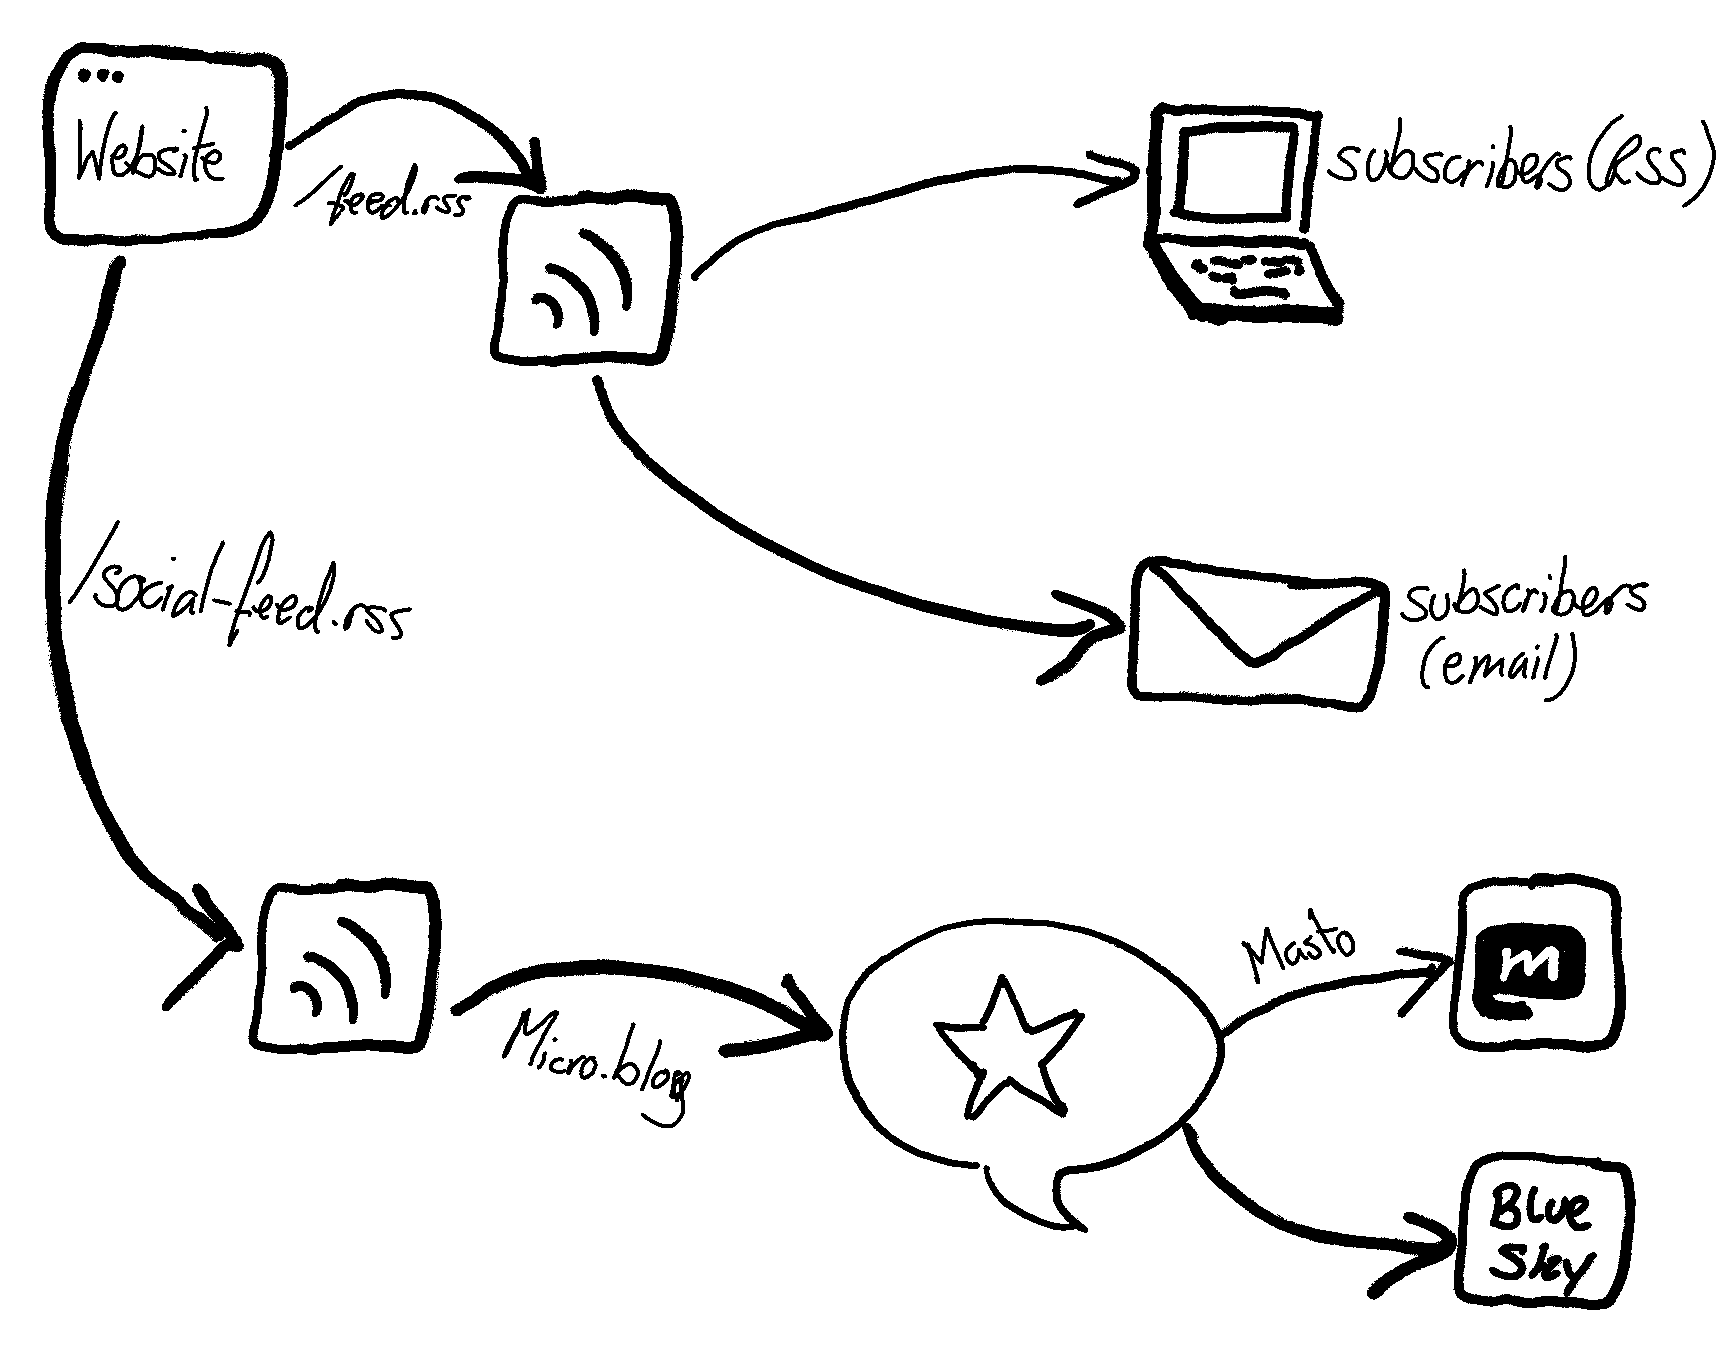 A diagram of how my site connects to other services